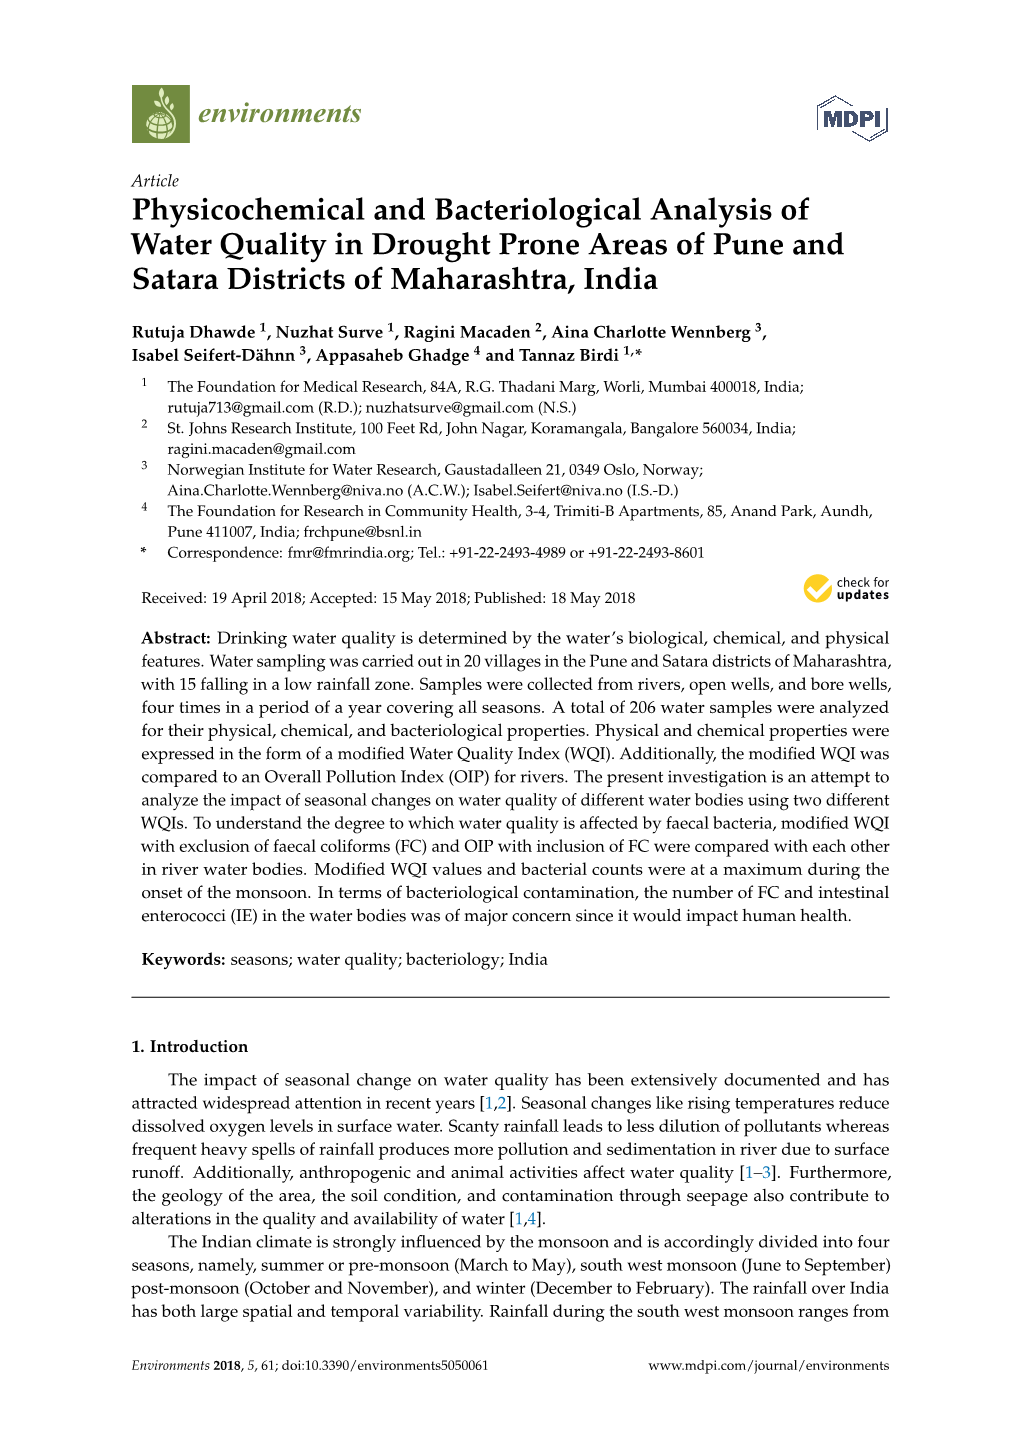 Physicochemical and Bacteriological Analysis of Water Quality in Drought Prone Areas of Pune and Satara Districts of Maharashtra, India